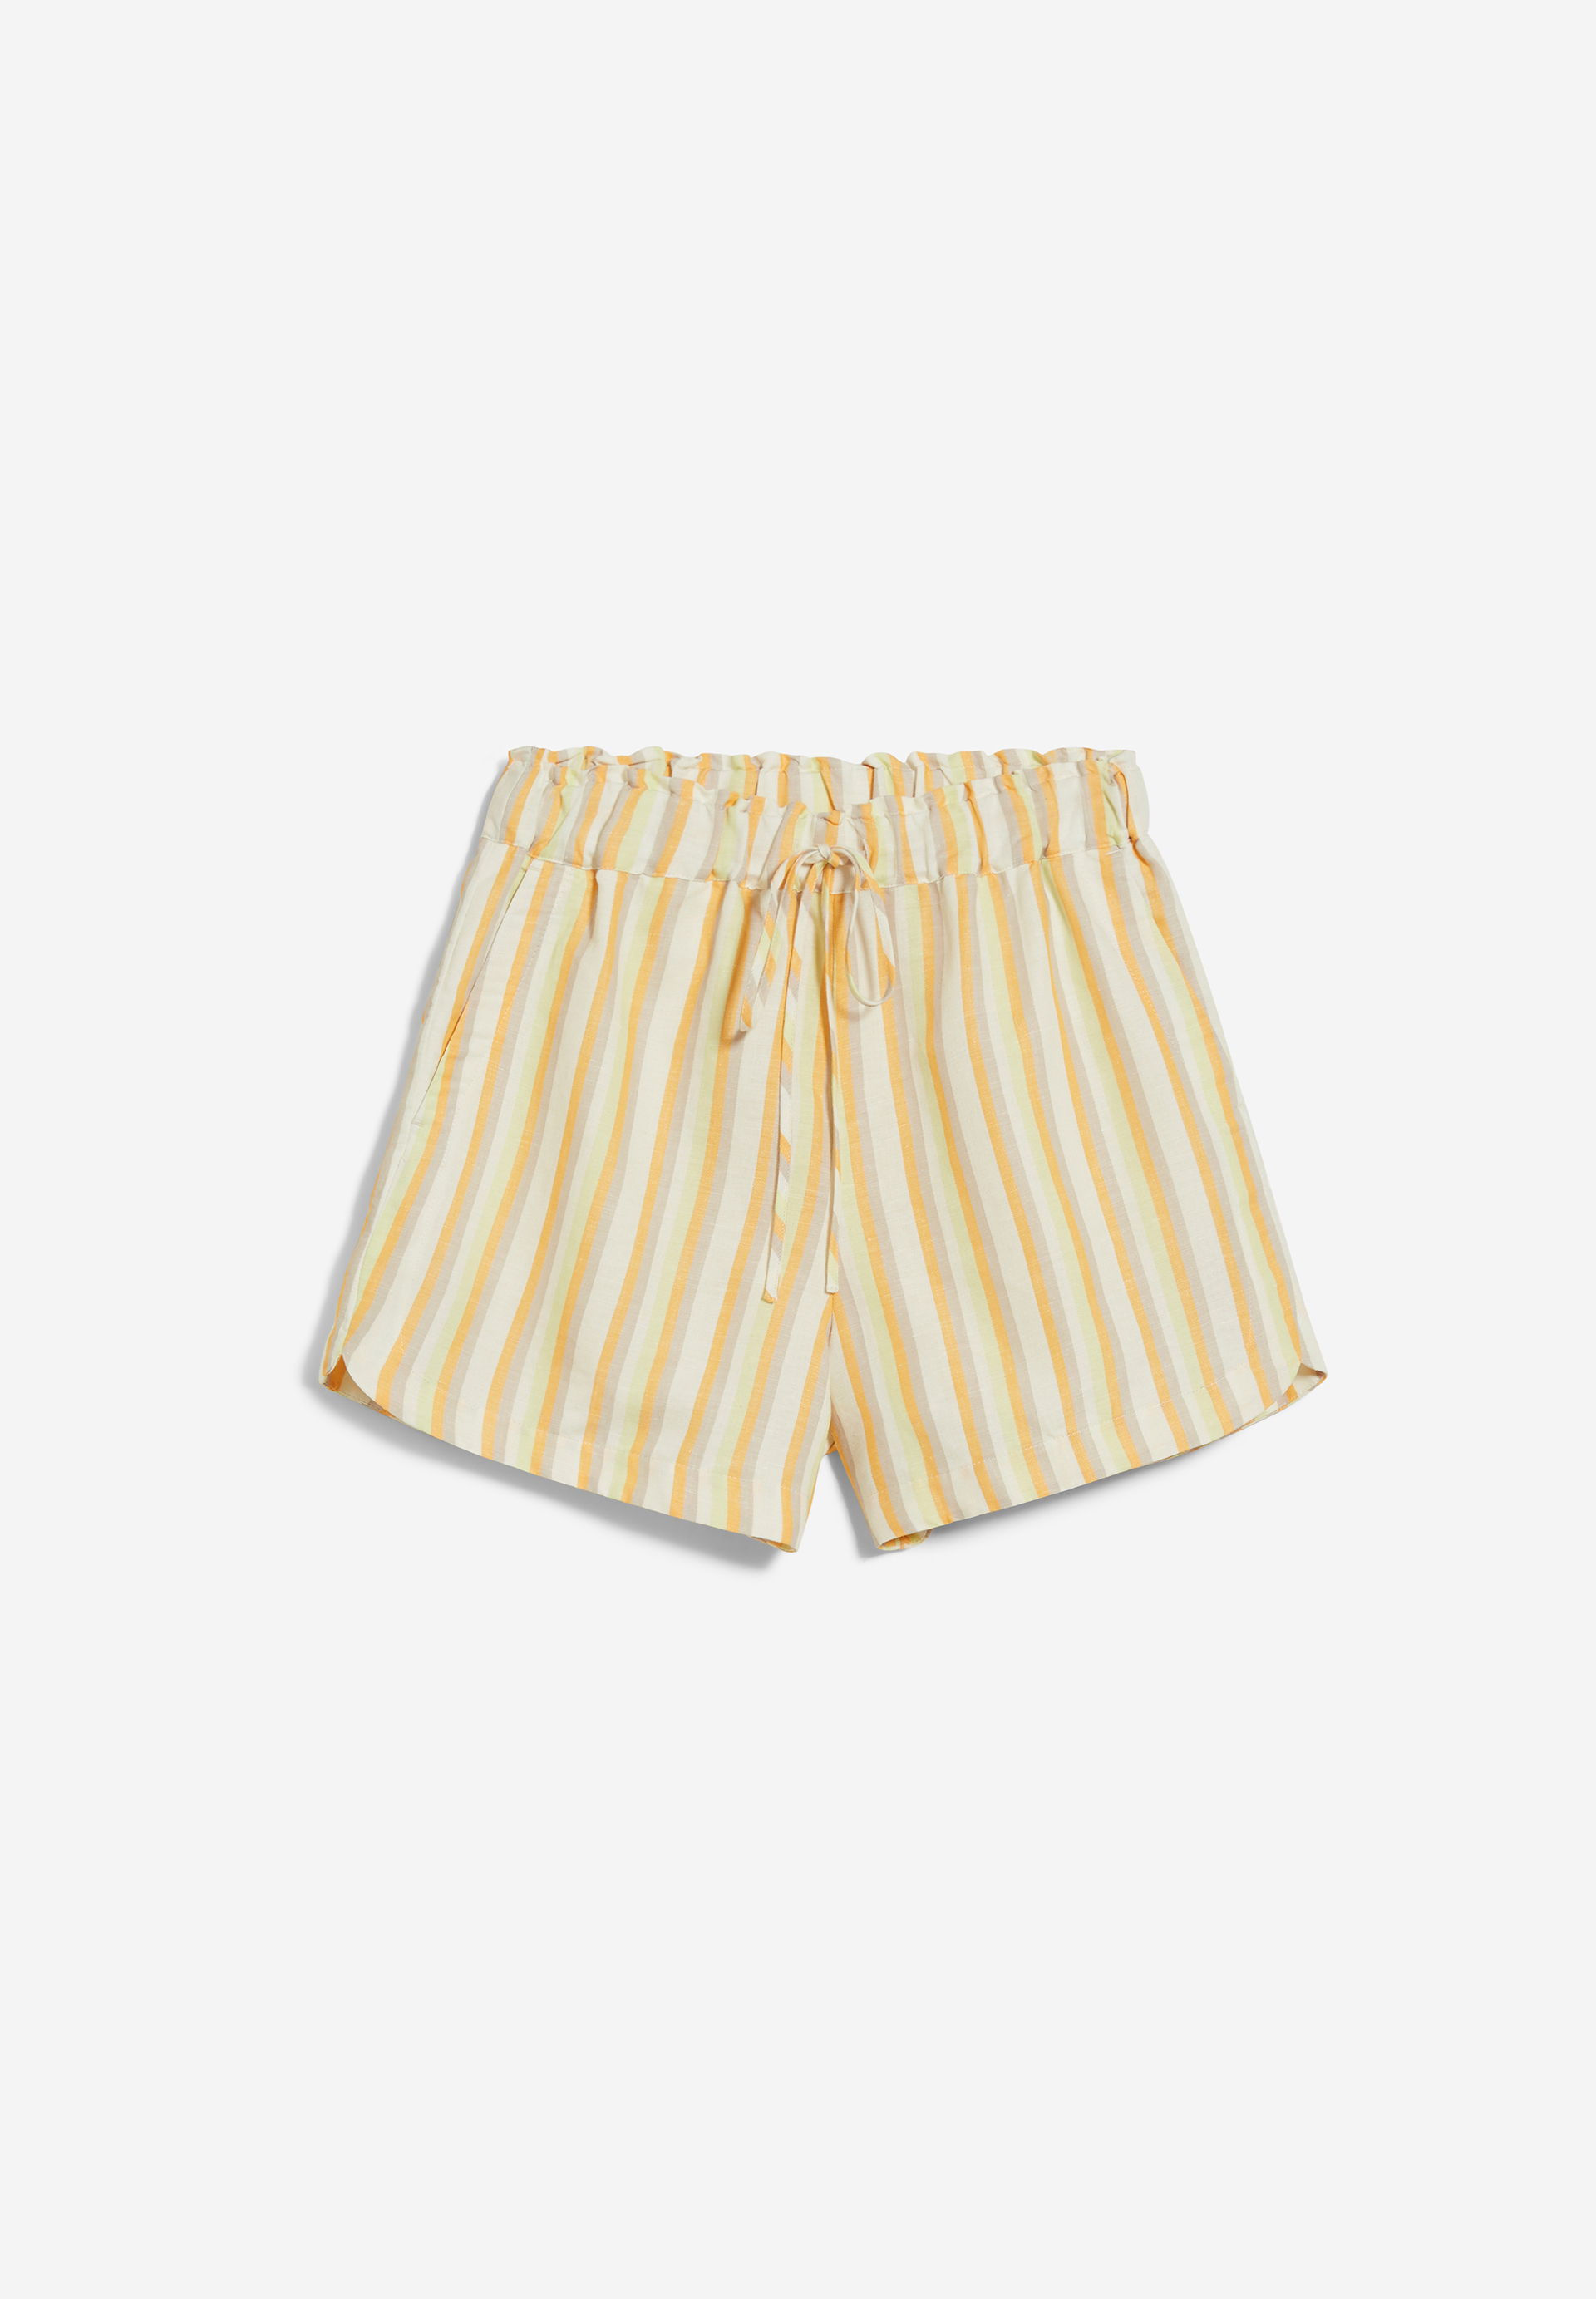 VAANNA STRIPED LINO Shorts Relaxed Fit made of Linen Mix